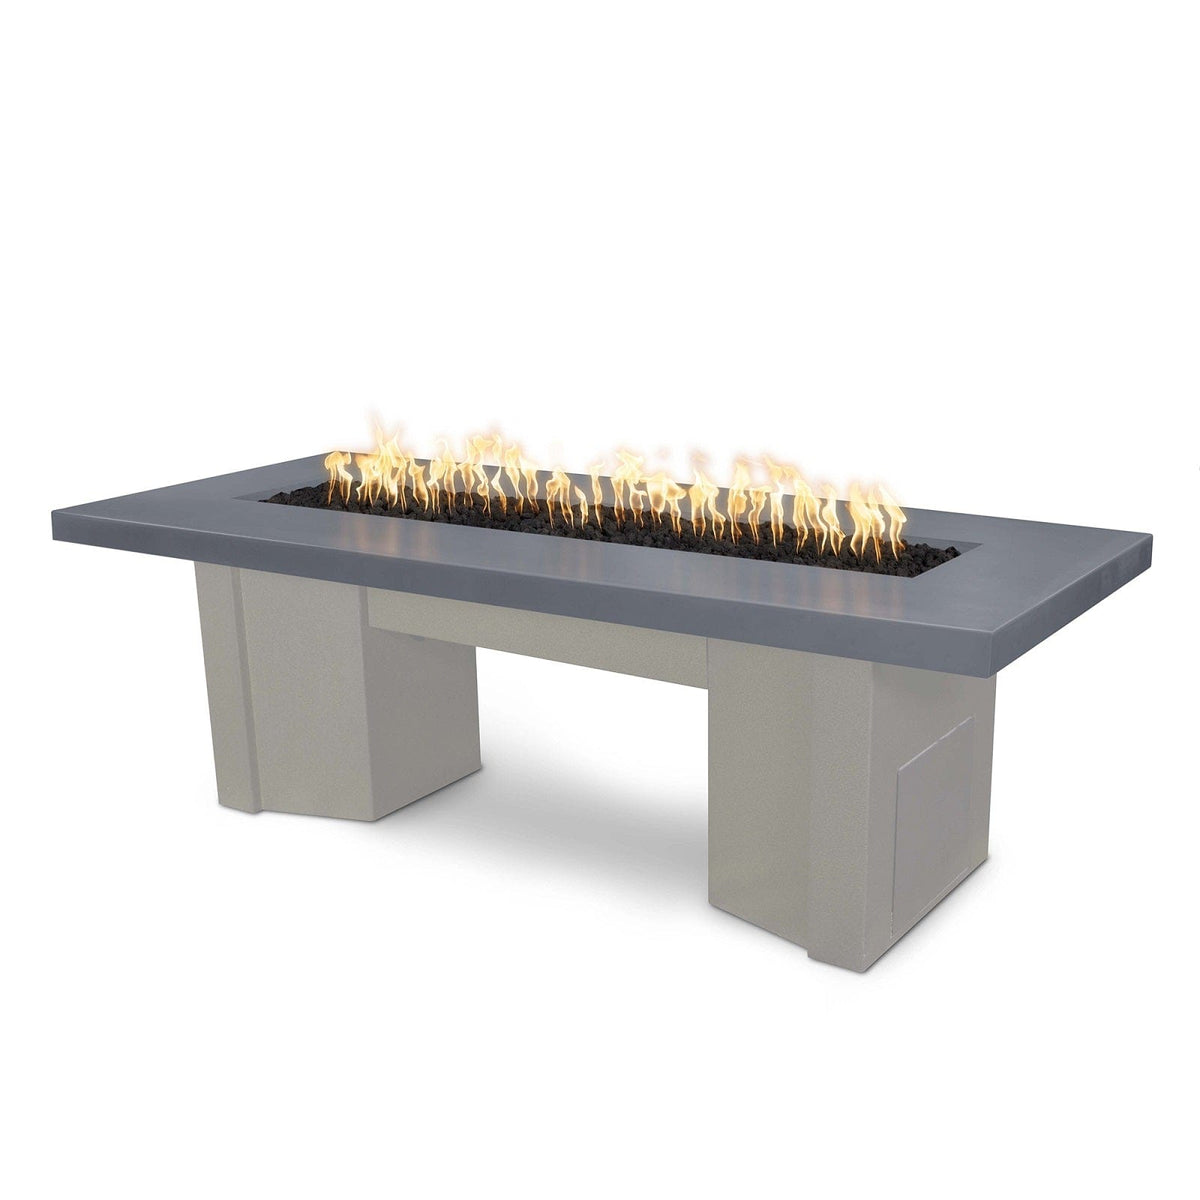 The Outdoor Plus Fire Features Gray (-GRY) / Pewter Powder Coated Steel (-PEW) The Outdoor Plus 78&quot; Alameda Fire Table Smooth Concrete in Natural Gas - Match Lit with Flame Sense System / OPT-ALMGFRC78FSML-NG